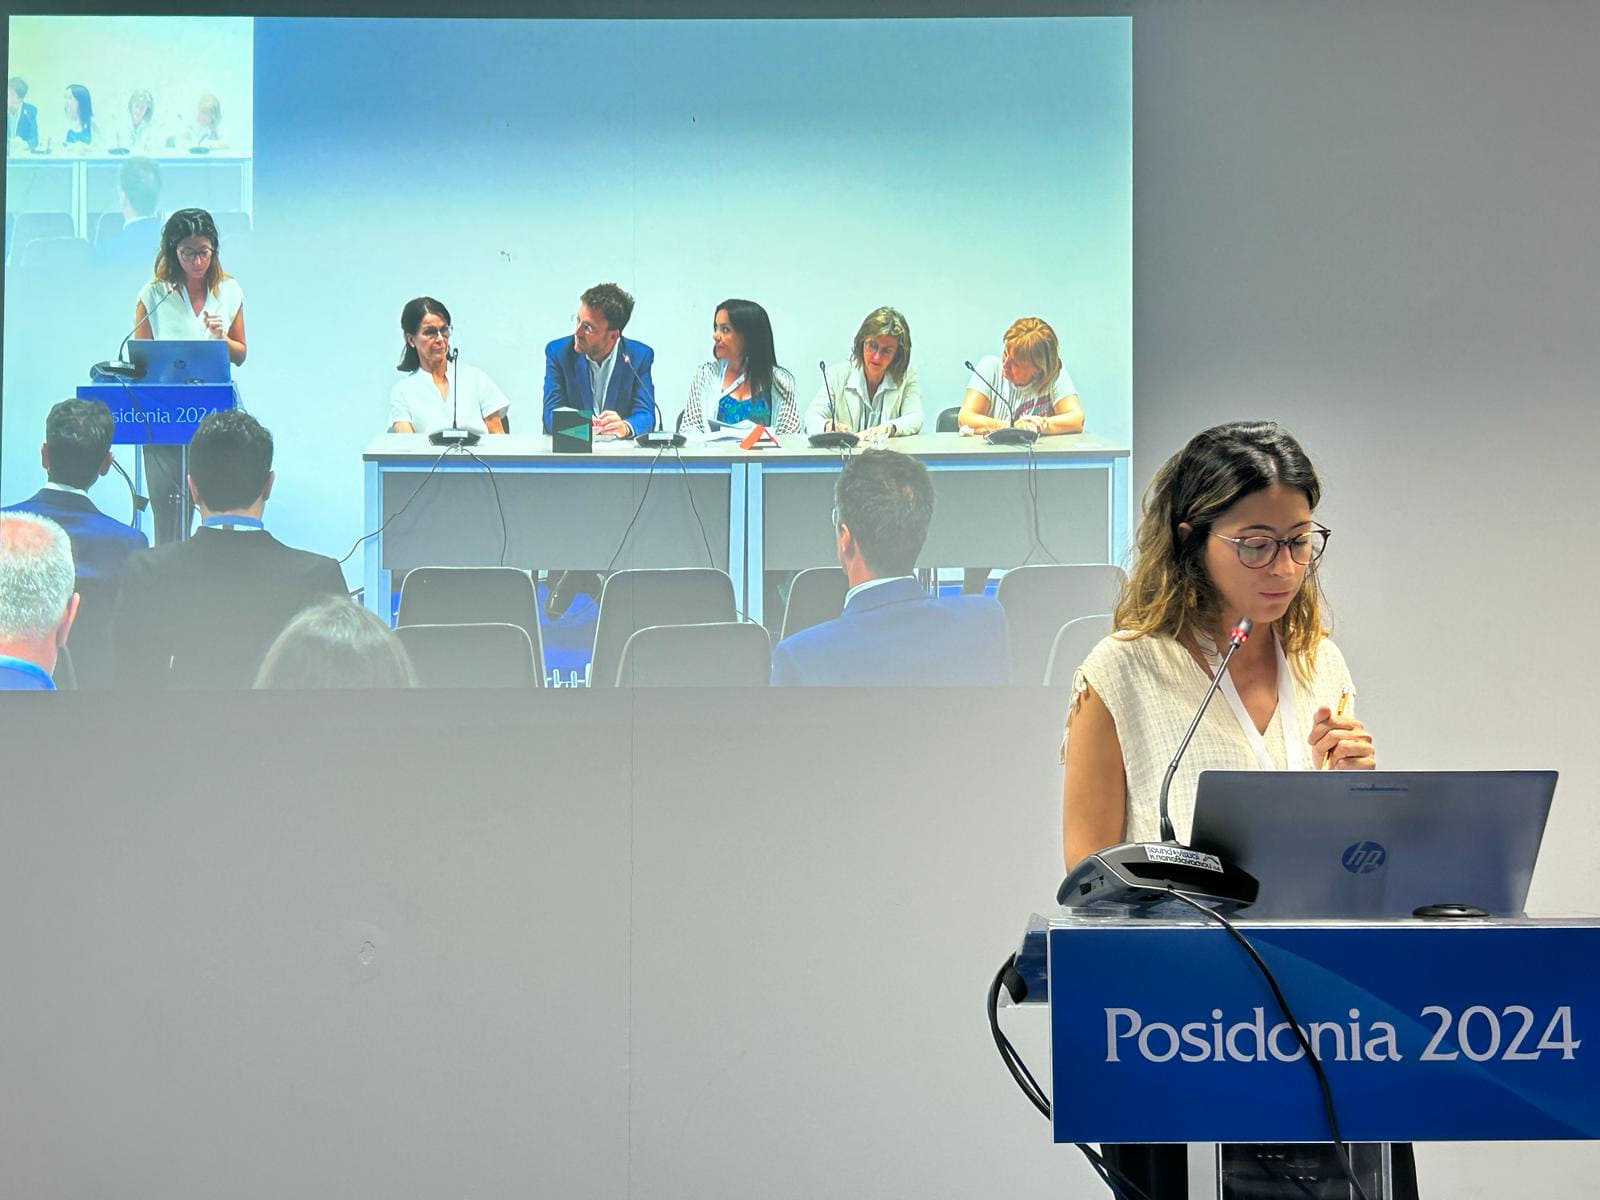 Adriana Salazar from the UfM at Posidonia 2024 with speakers panel in background